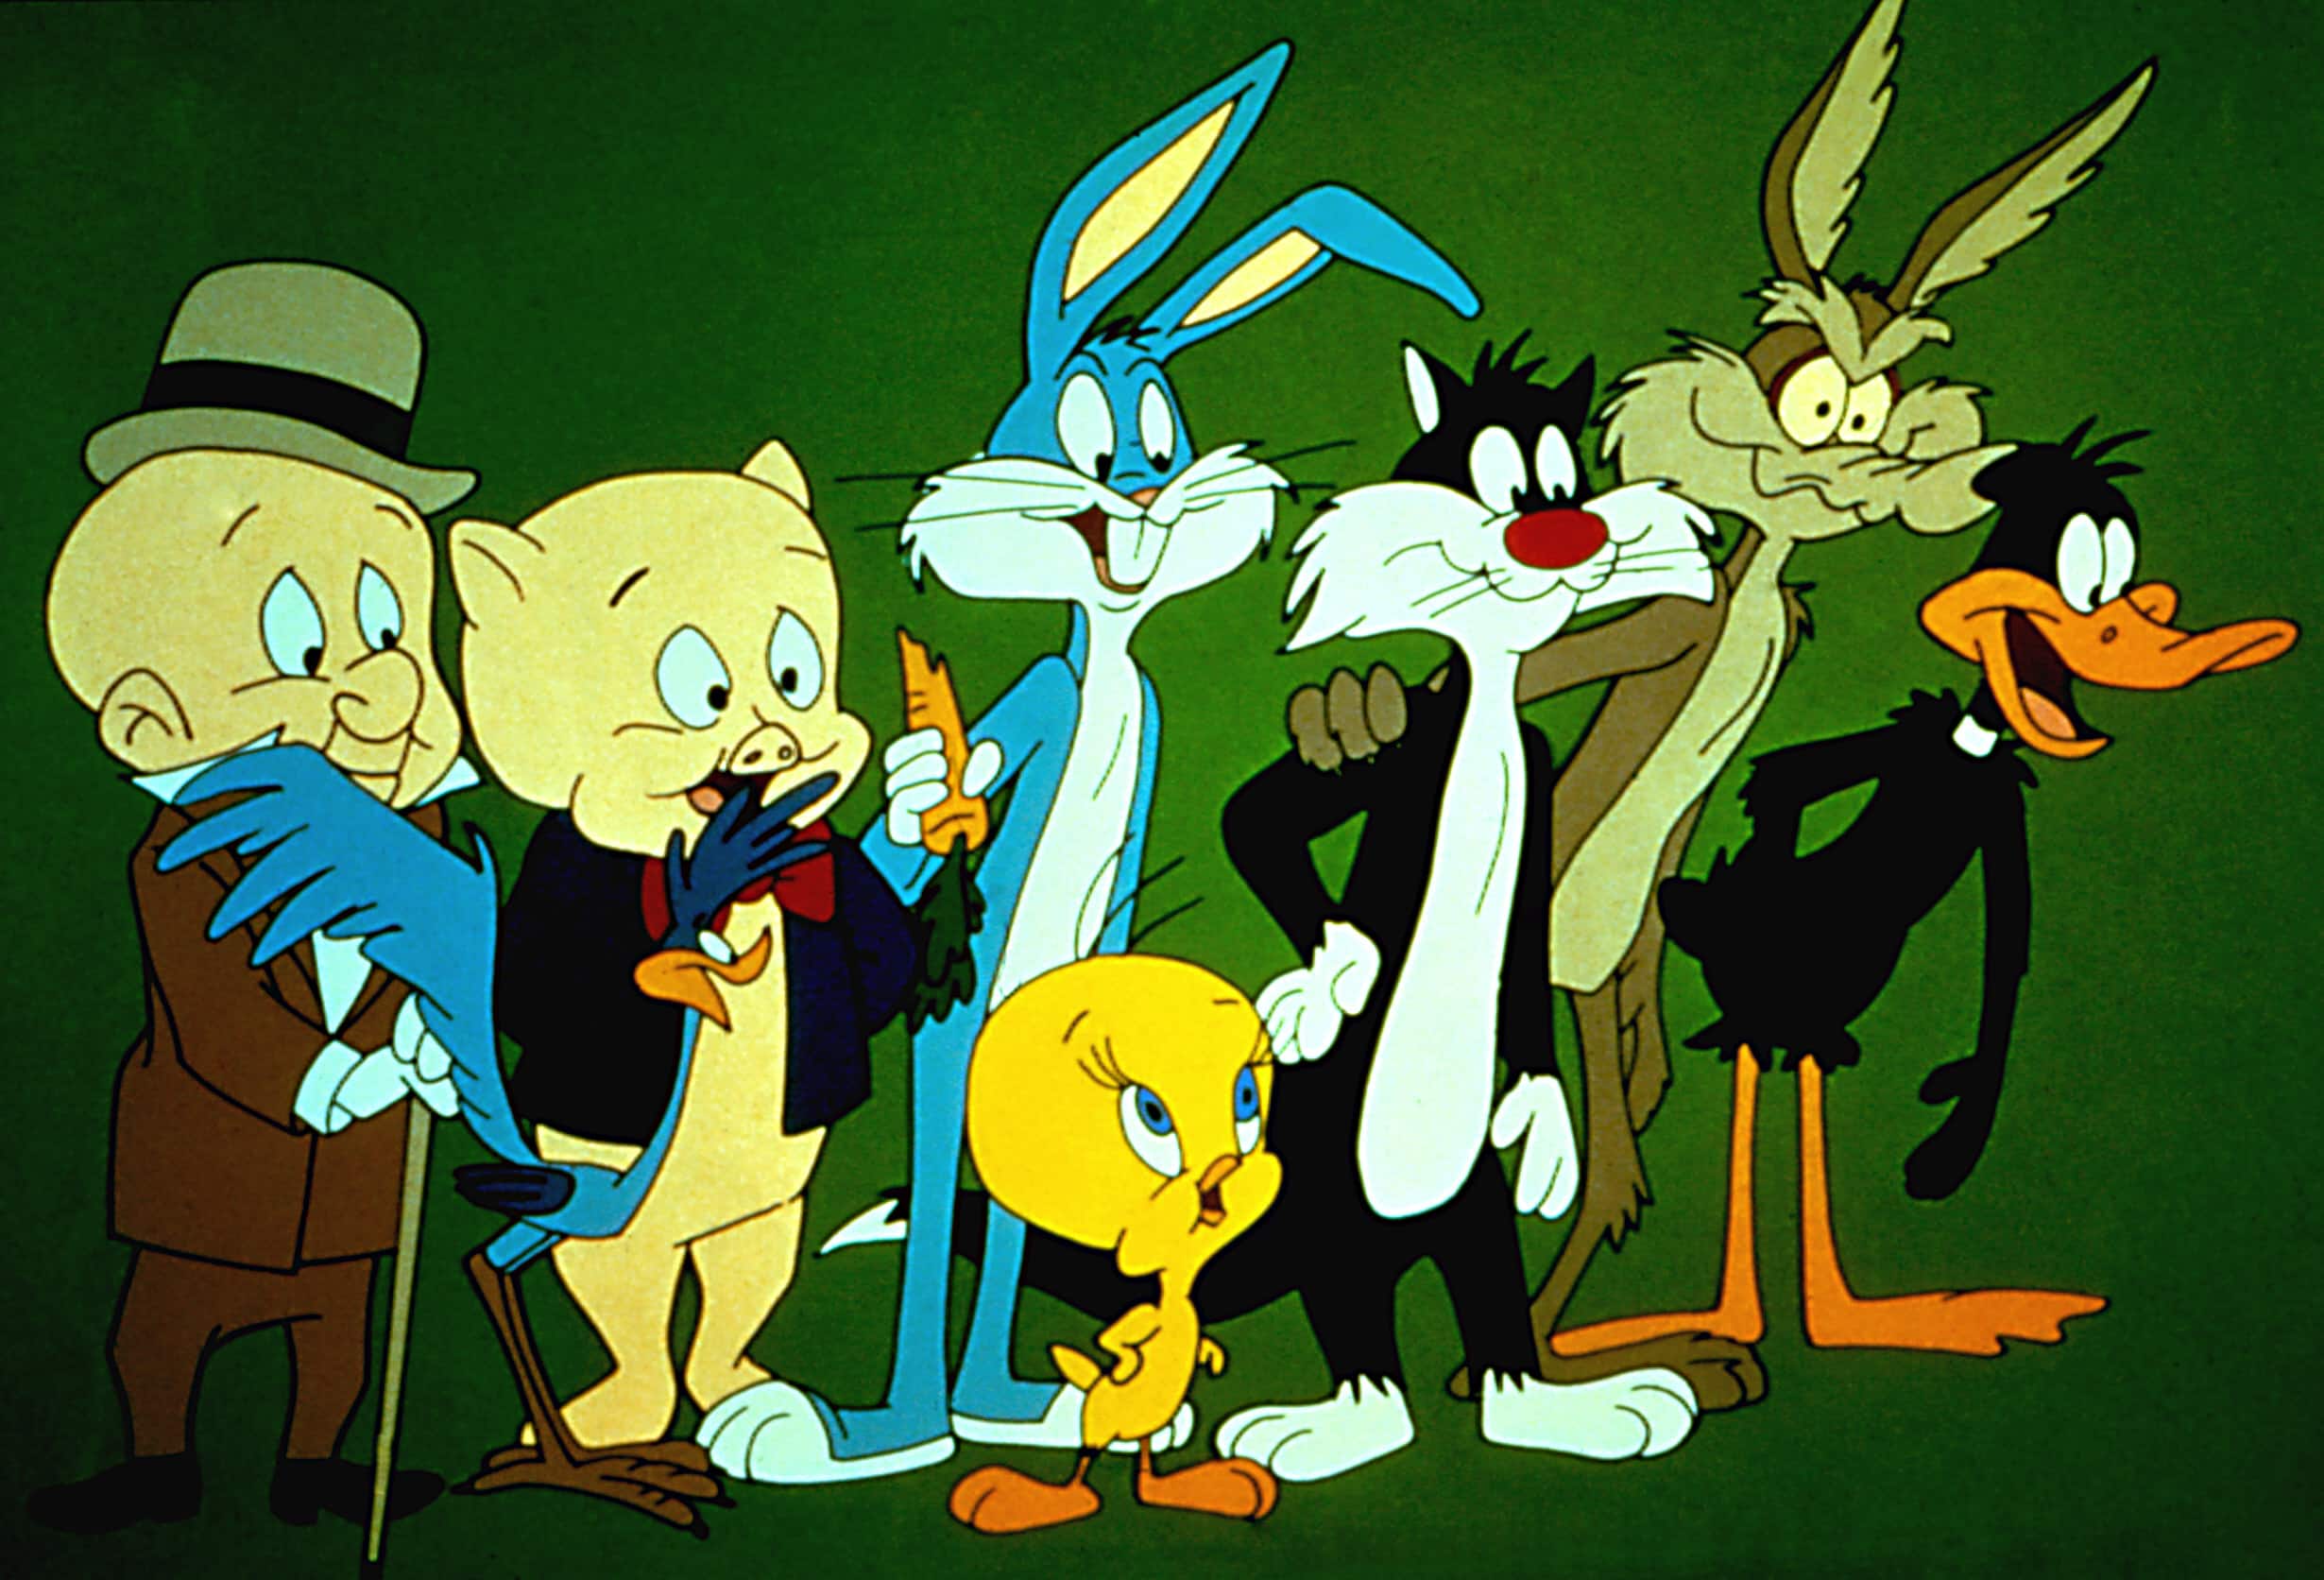 THE BUGS BUNNY AND TWEETY SHOW, Elmer Fudd, Road Runner, Porky Pig, Bugs Bunny, Tweety, Sylvester, Wile E. Coyote, Daffy Duck, 1986